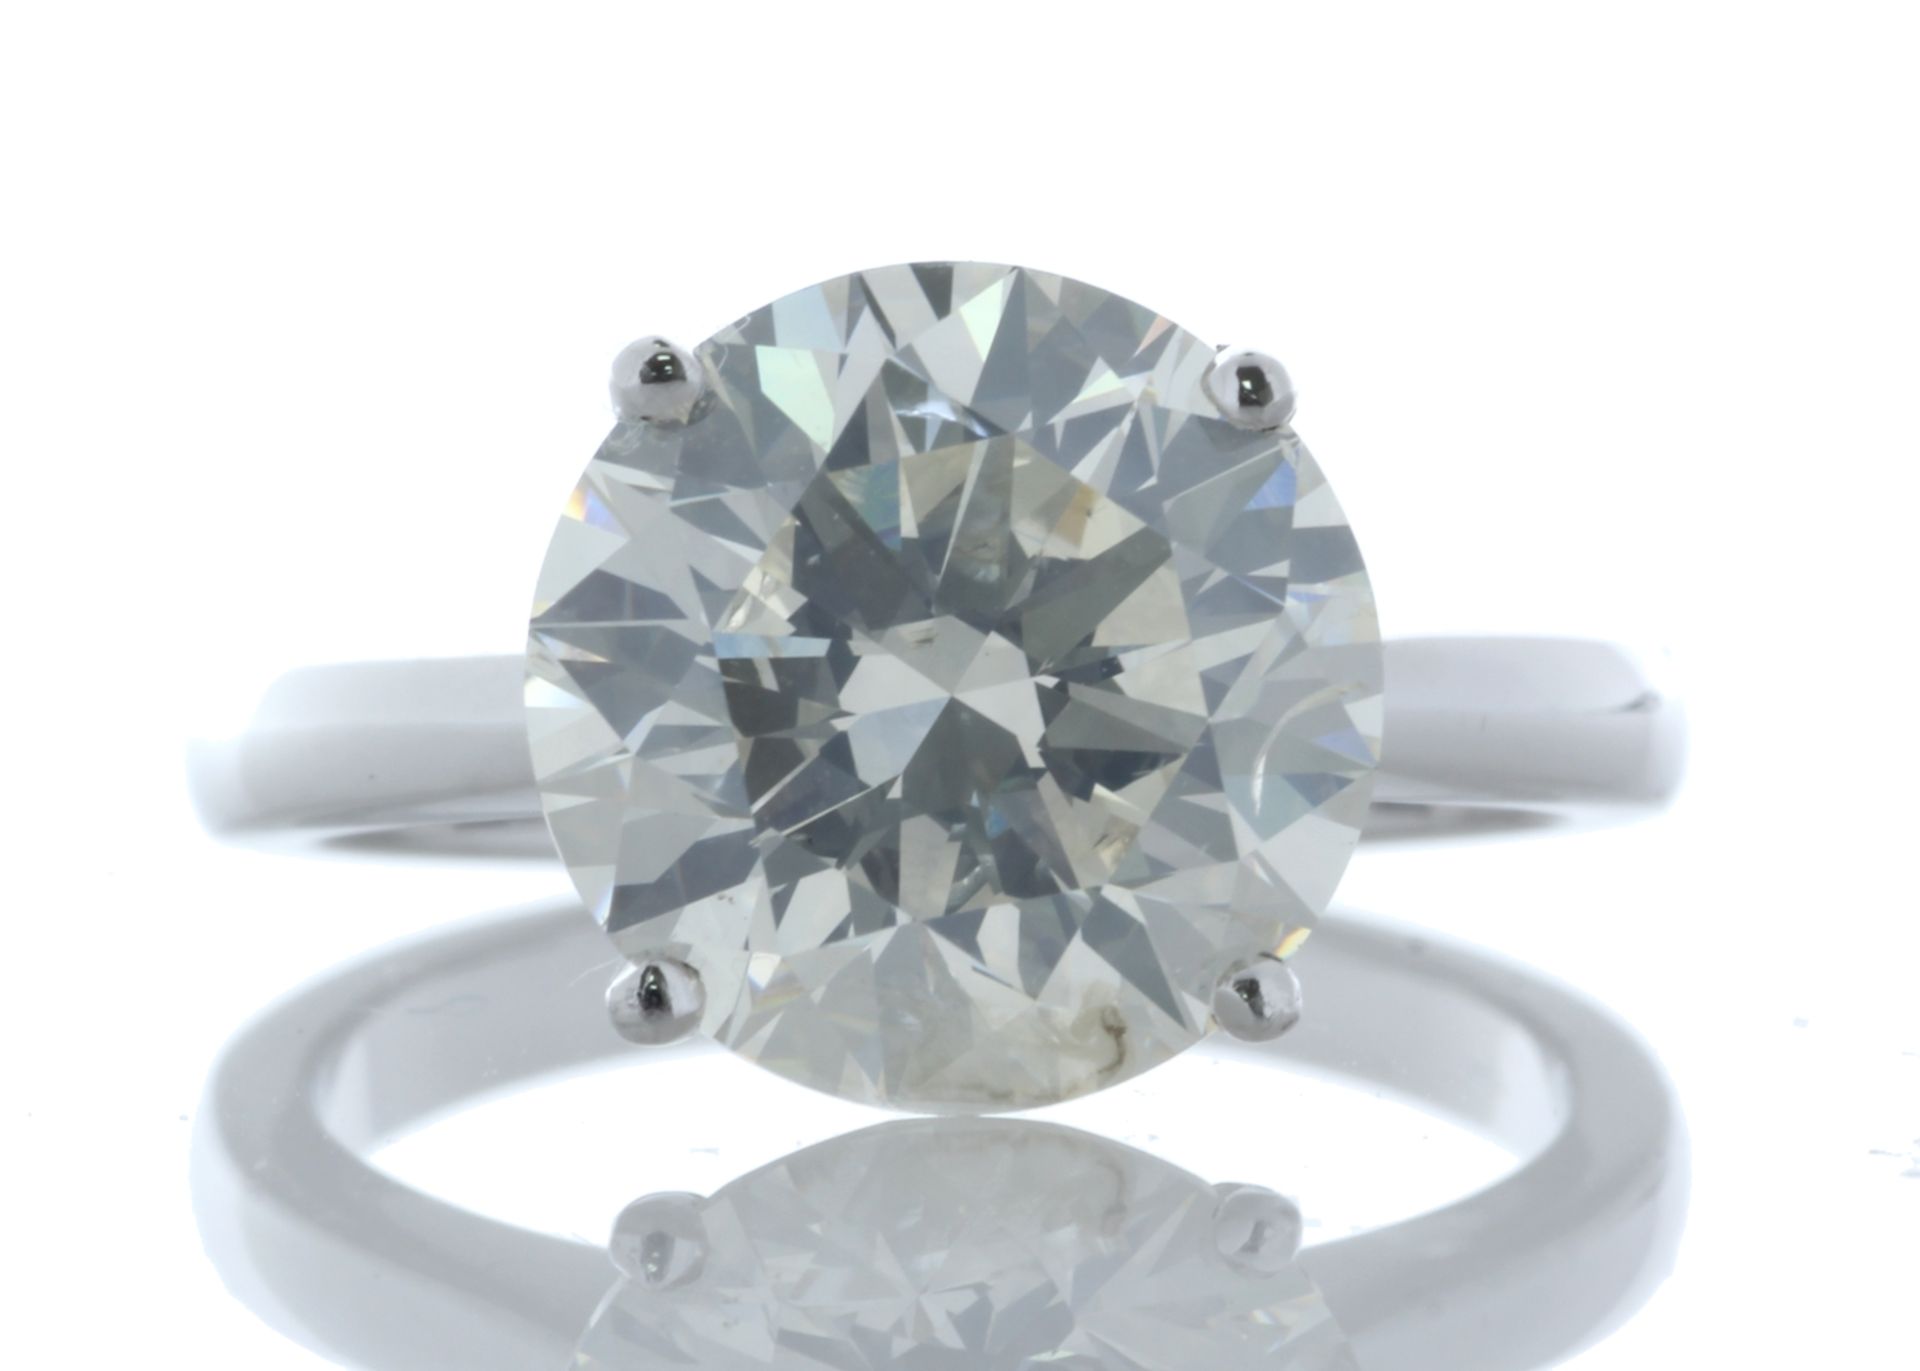 18ct White Gold Single Stone Prong Set Diamond Ring 5.07 Carats - Valued By IDI £157,500.00 - A